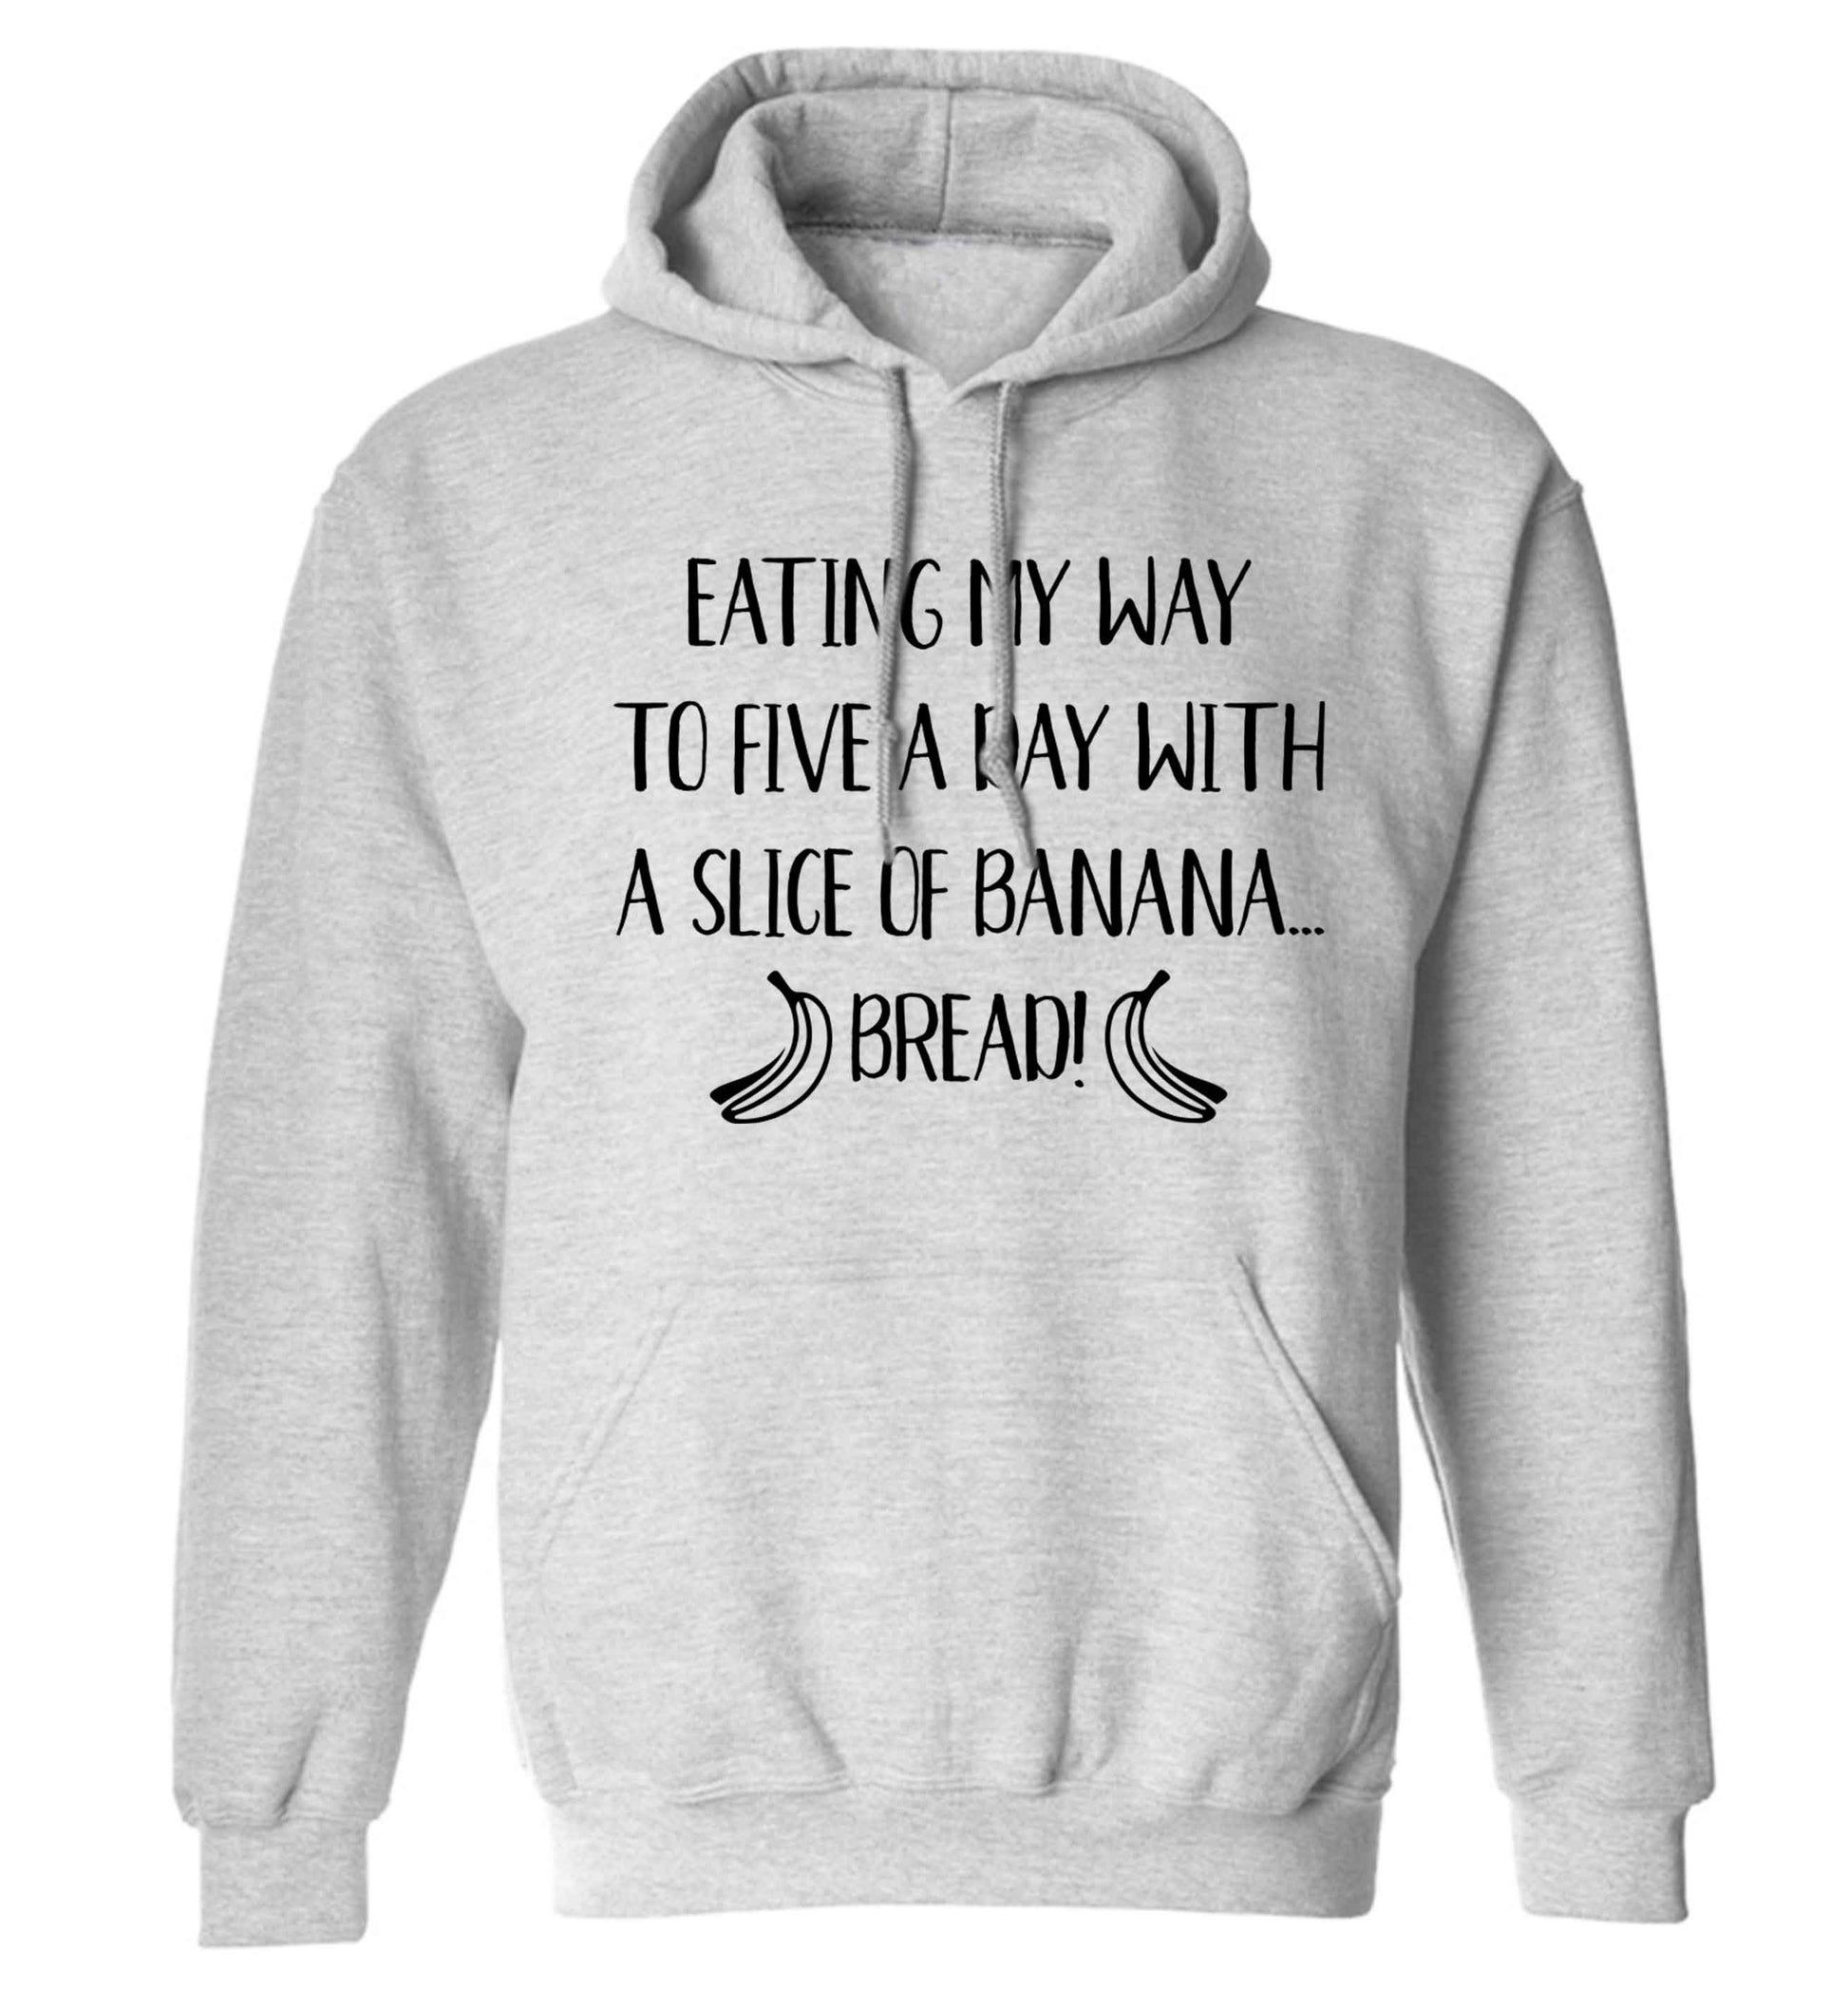 Eating my way to five a day with a slice of banana bread adults unisex grey hoodie 2XL